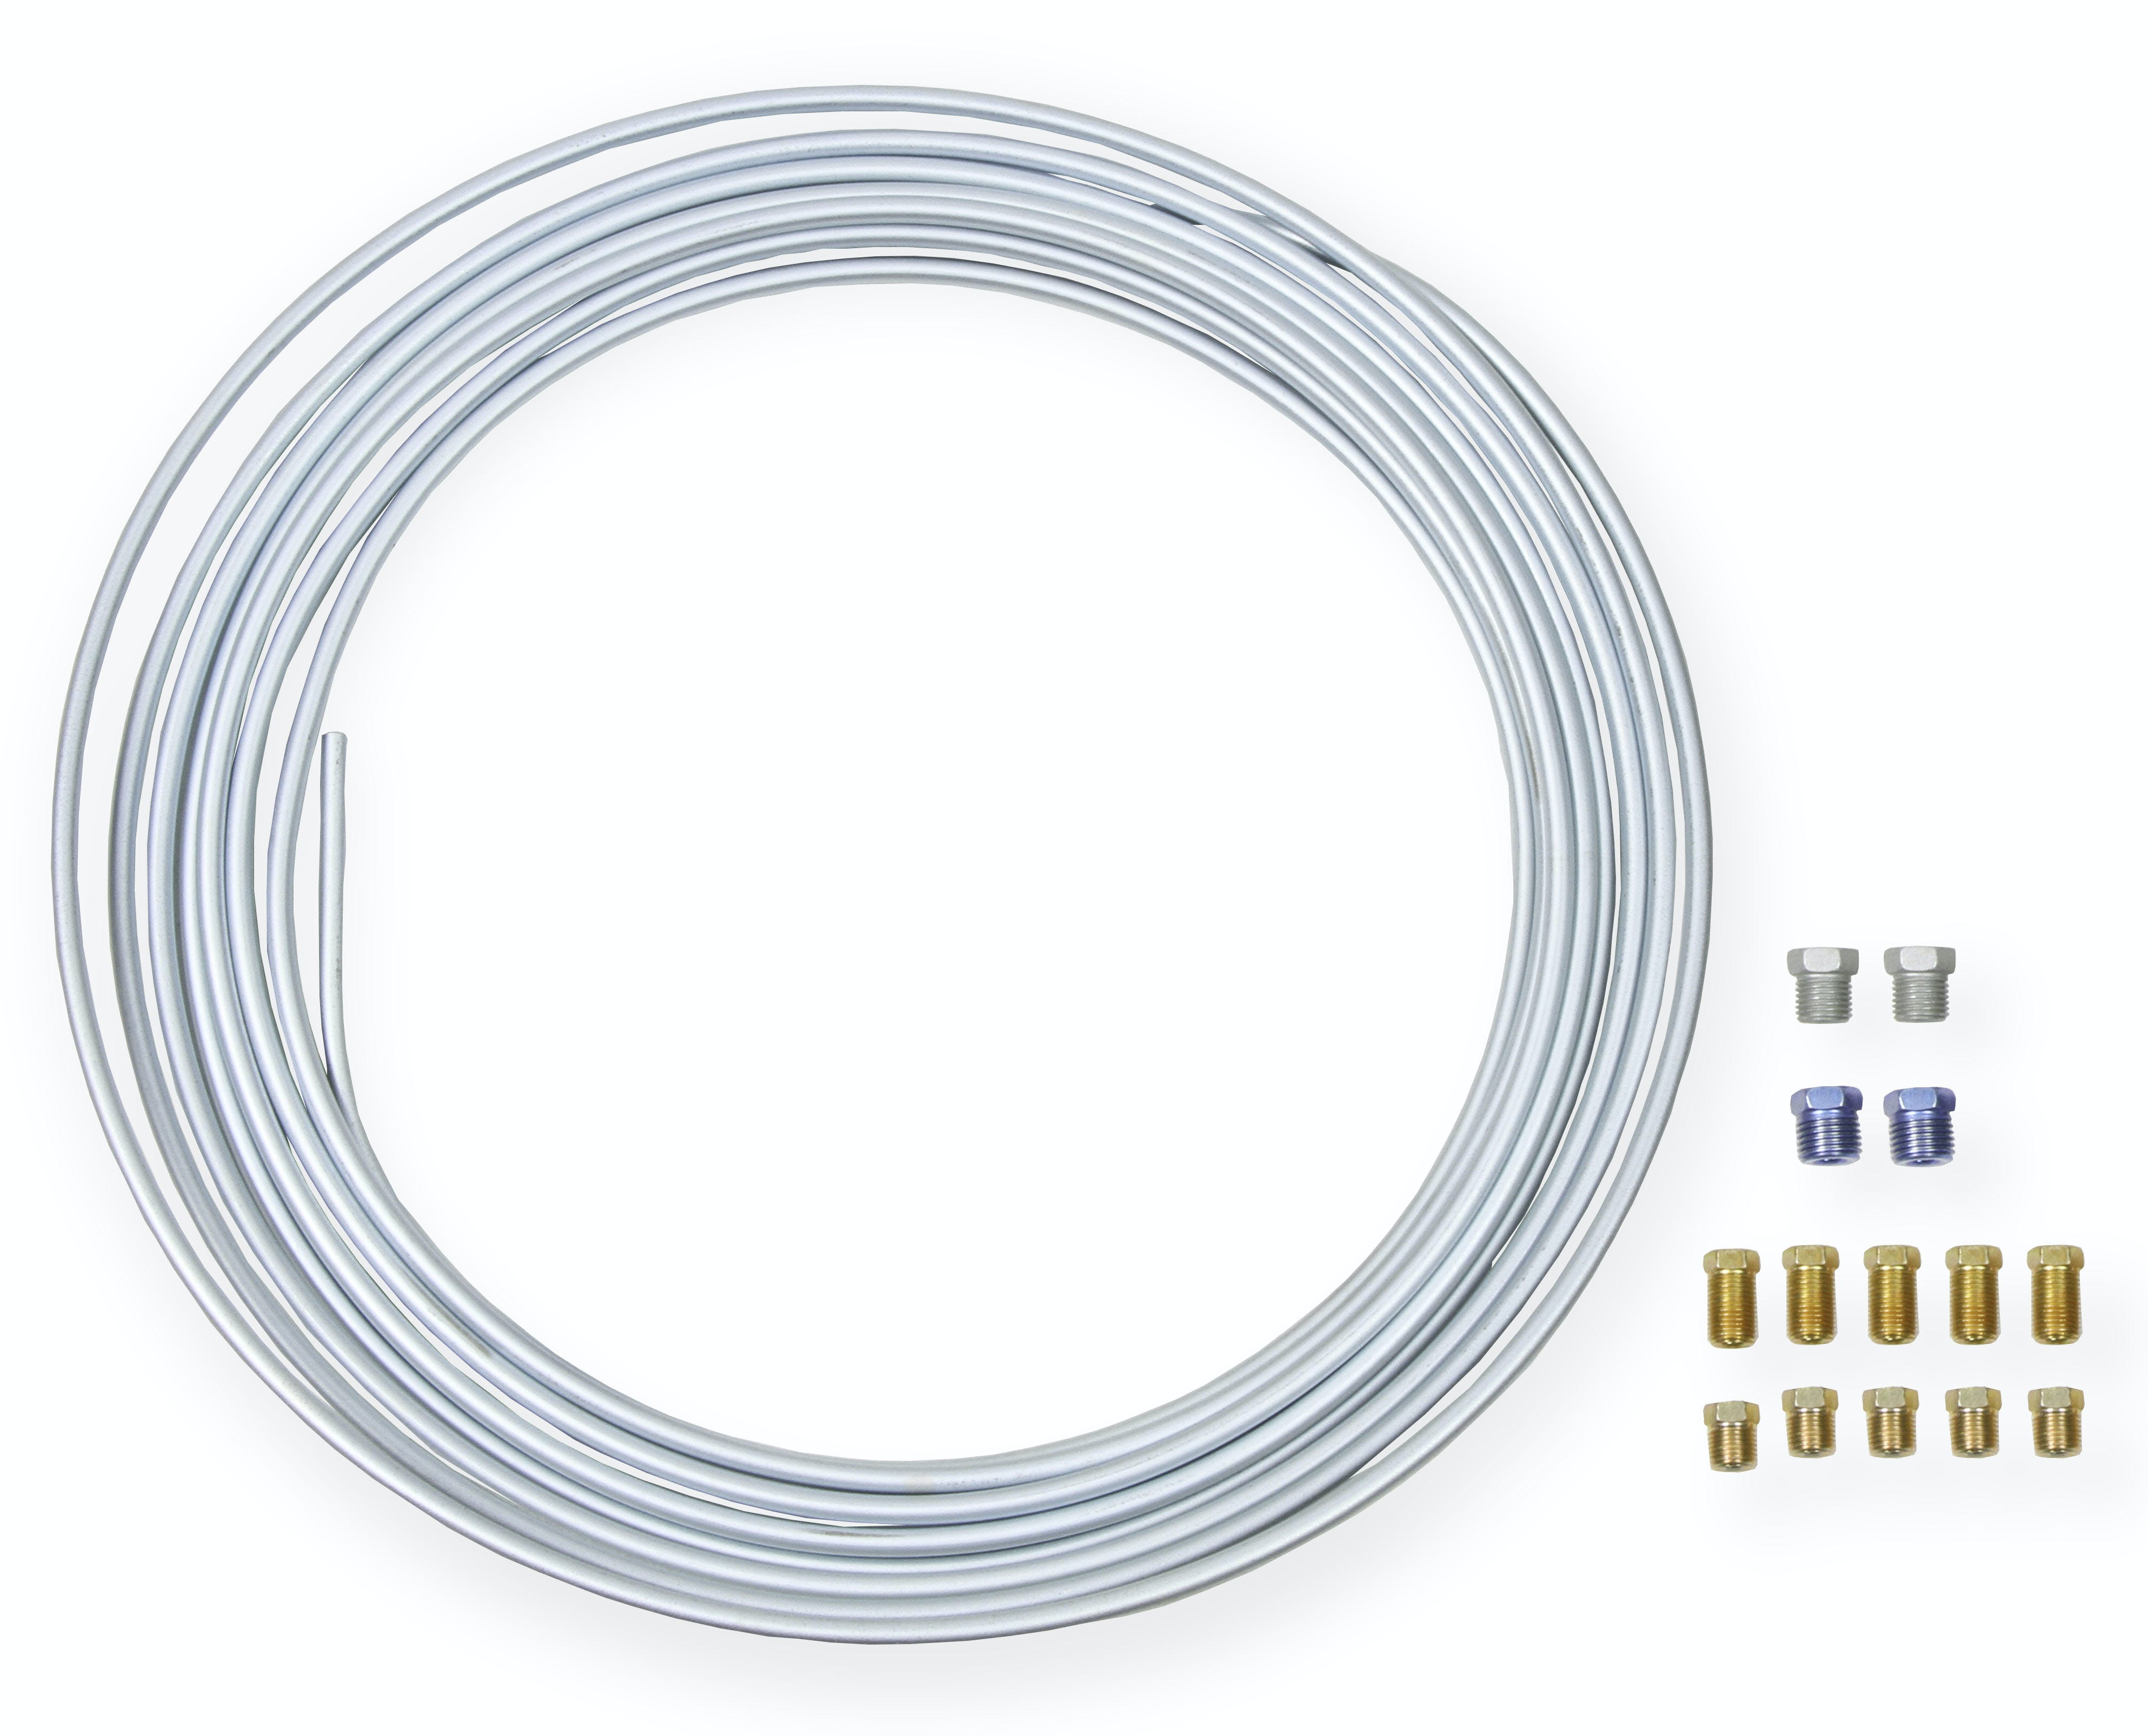 Earl's Performance Plumbing ZC6416KERL 1/4 IN X 25 FT COIL and FITTING KIT - ZINC